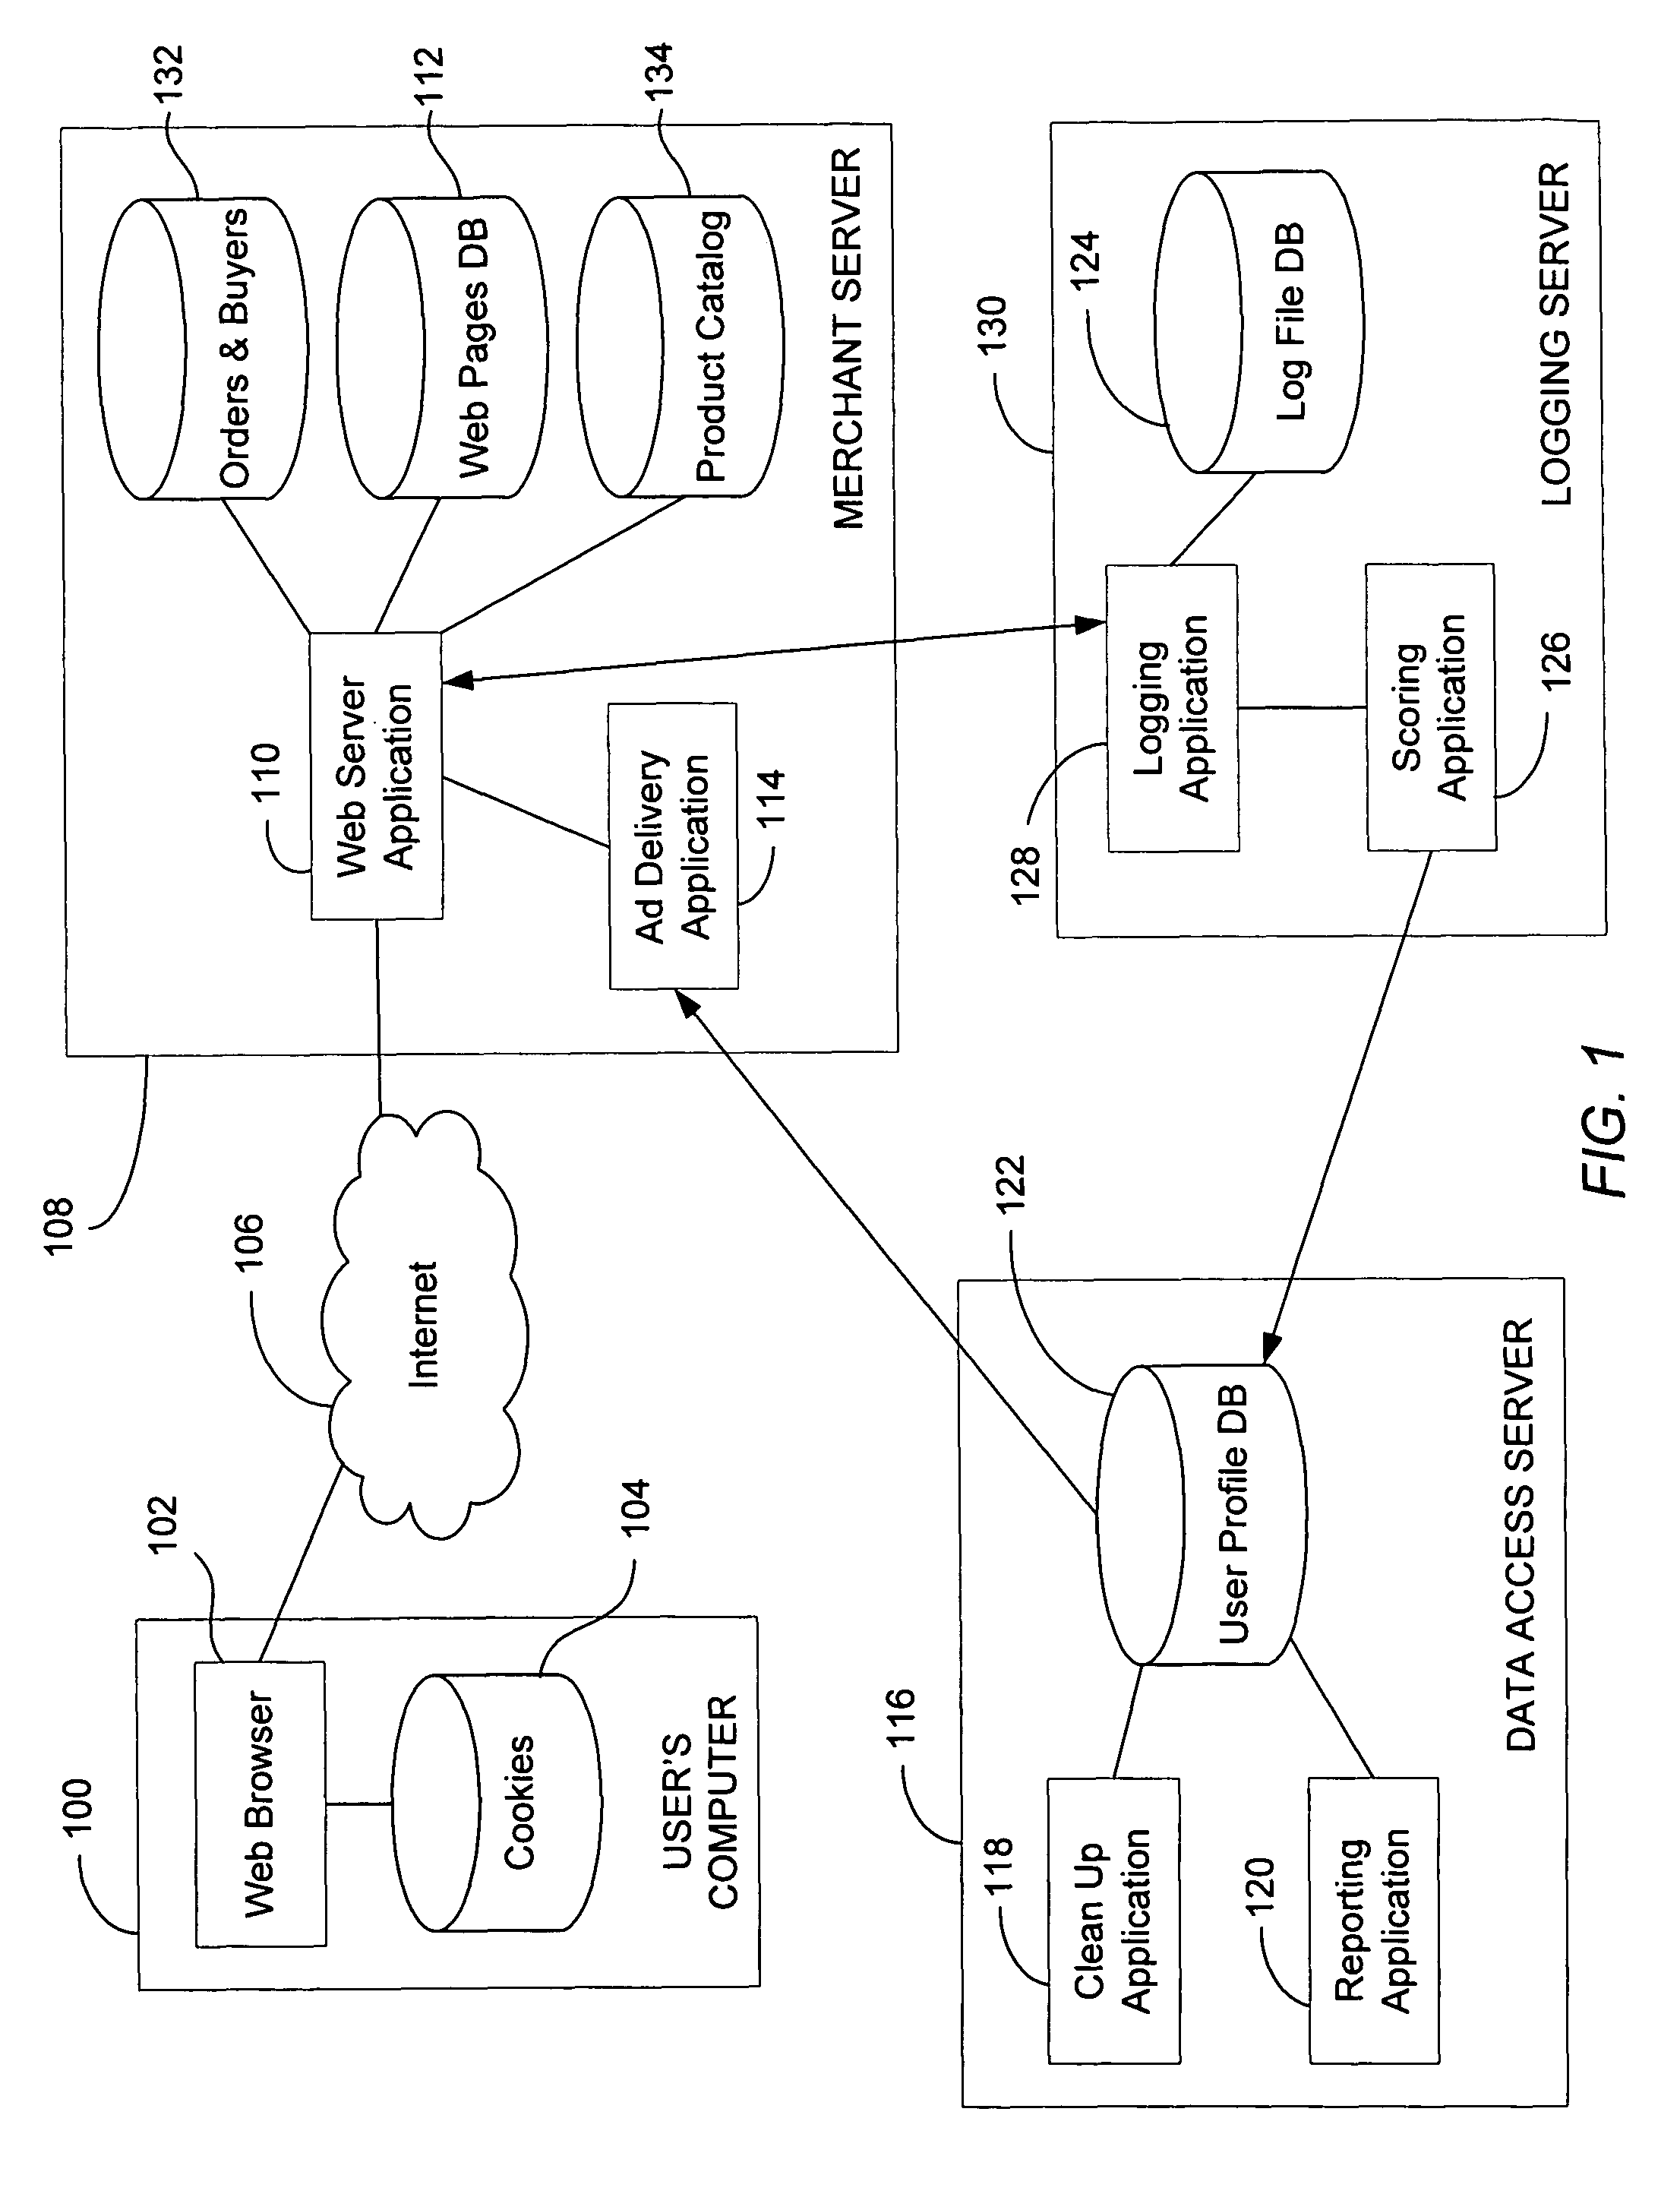 System and method for targeted ad delivery